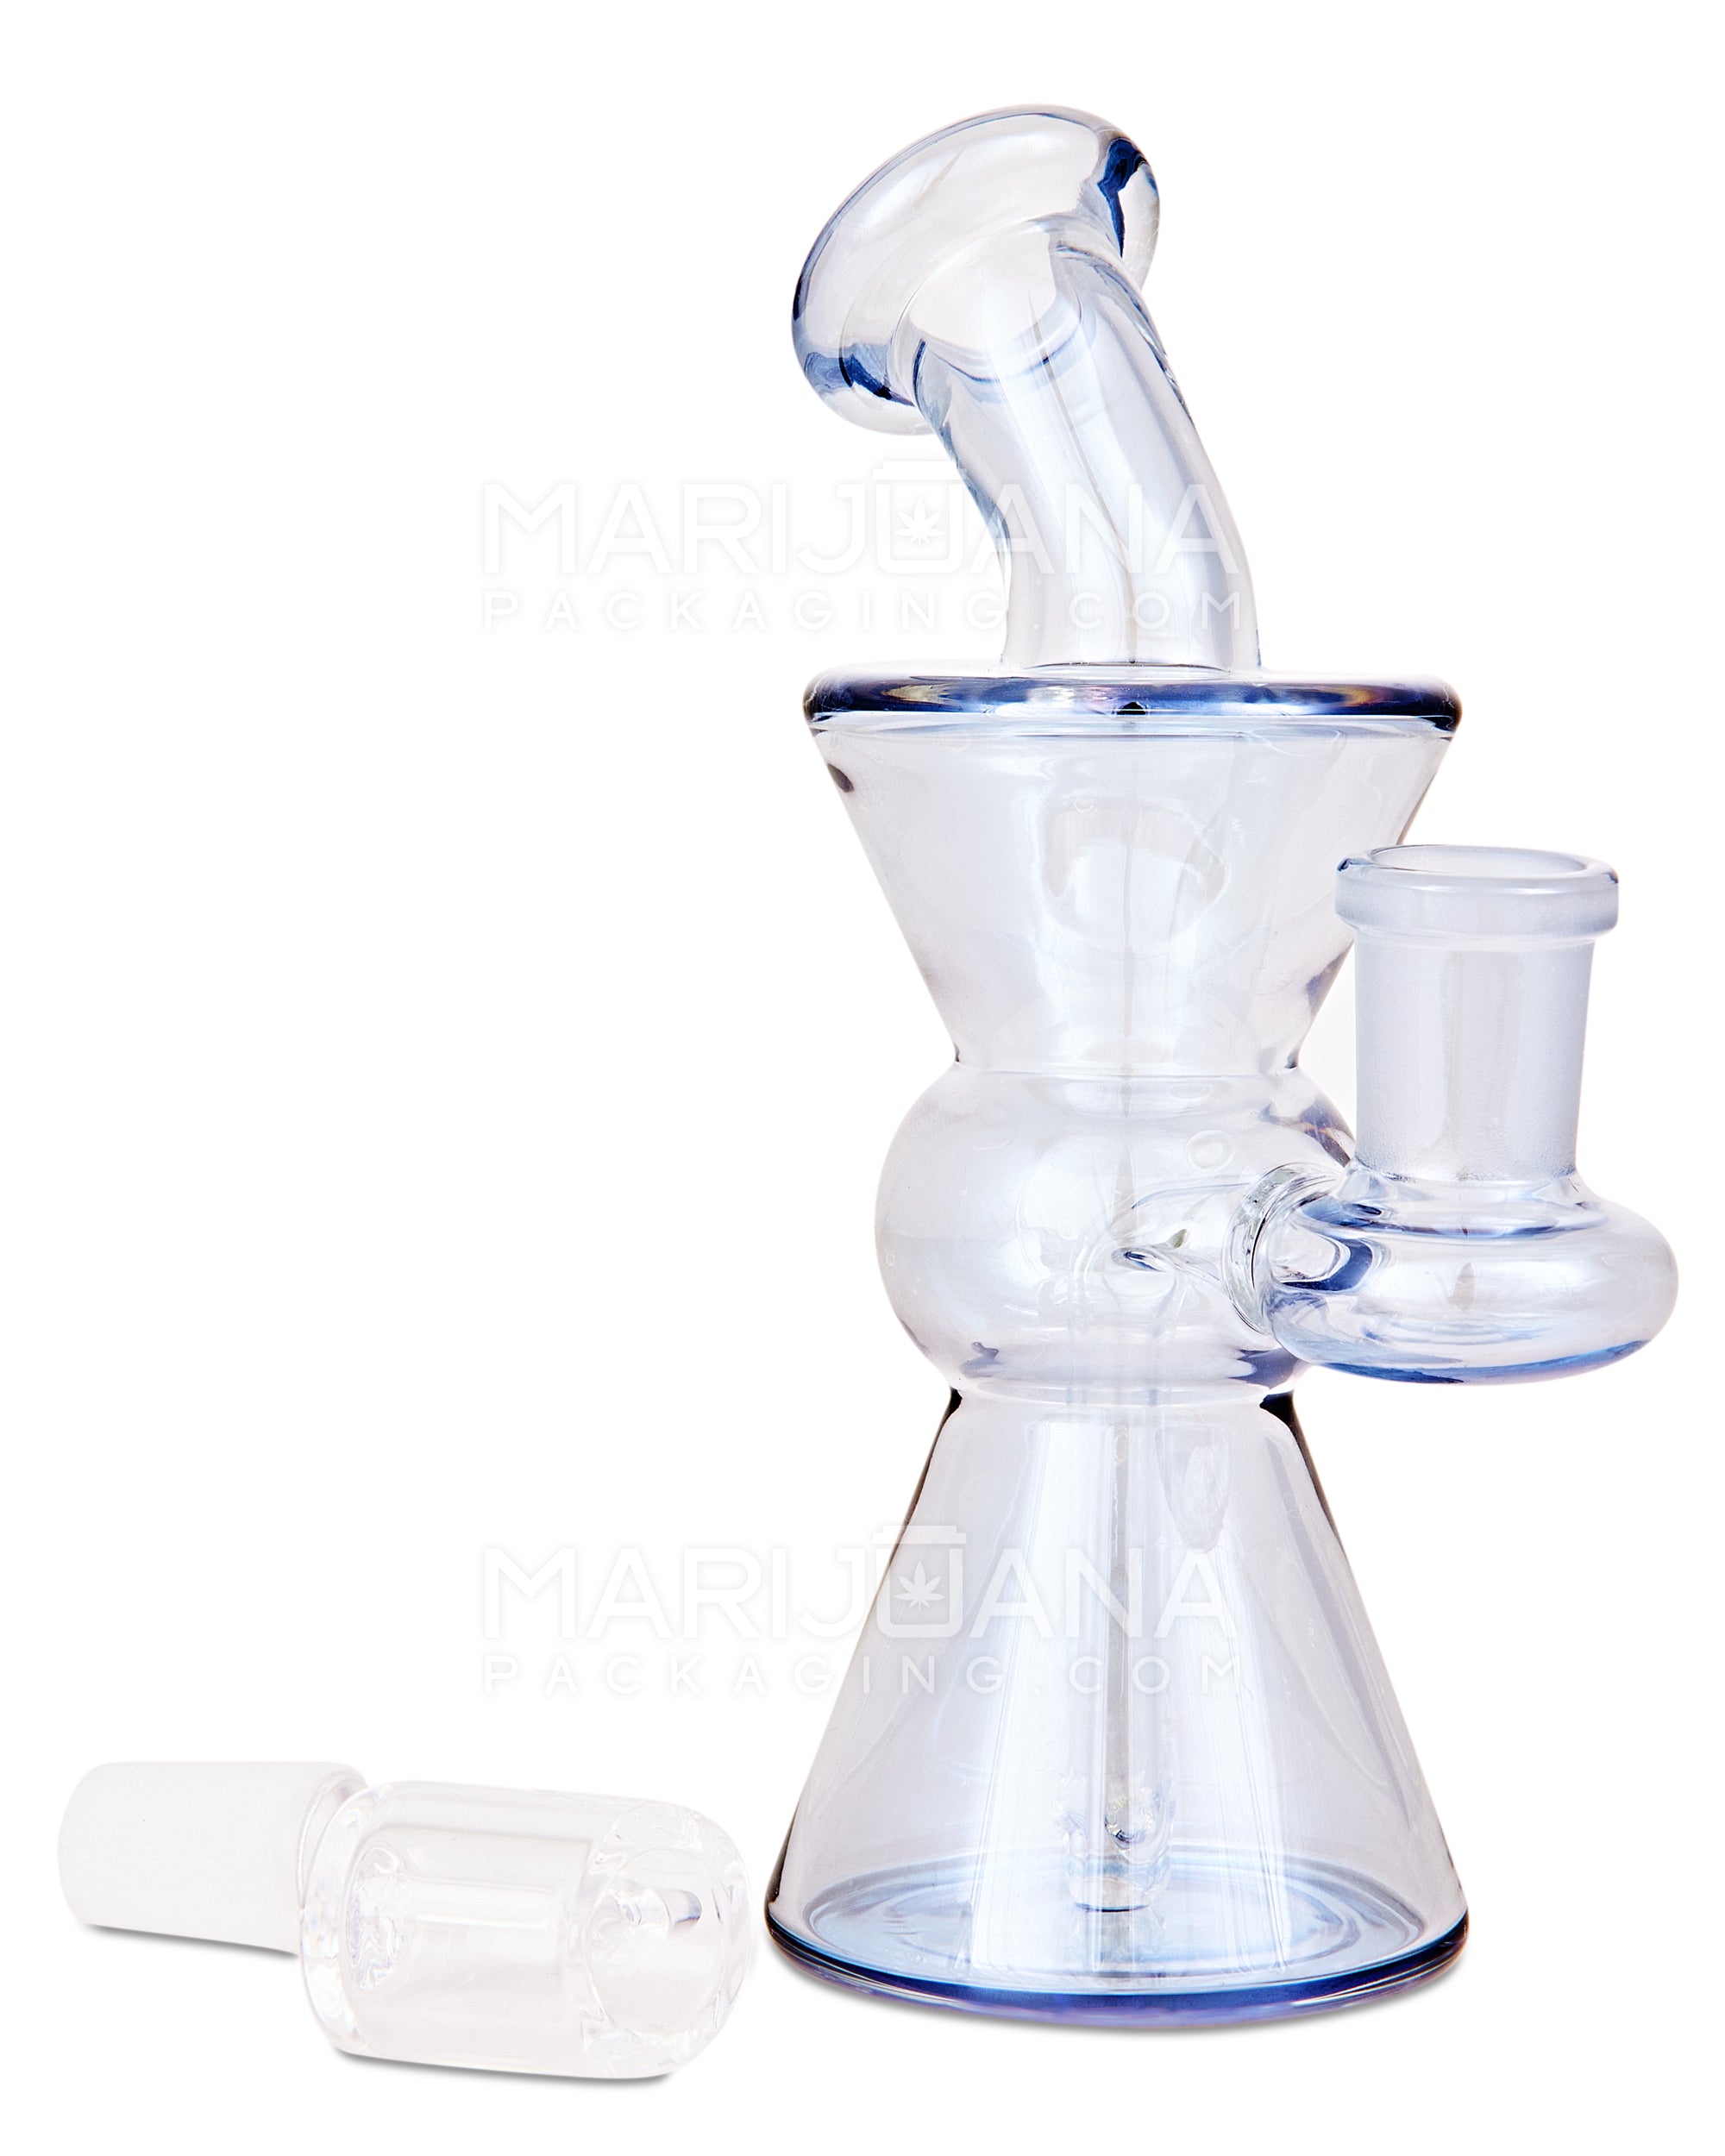 Bent Neck Hourglass Glass Dab Rig | 6in Tall - 14mm Banger - Smoke - 2